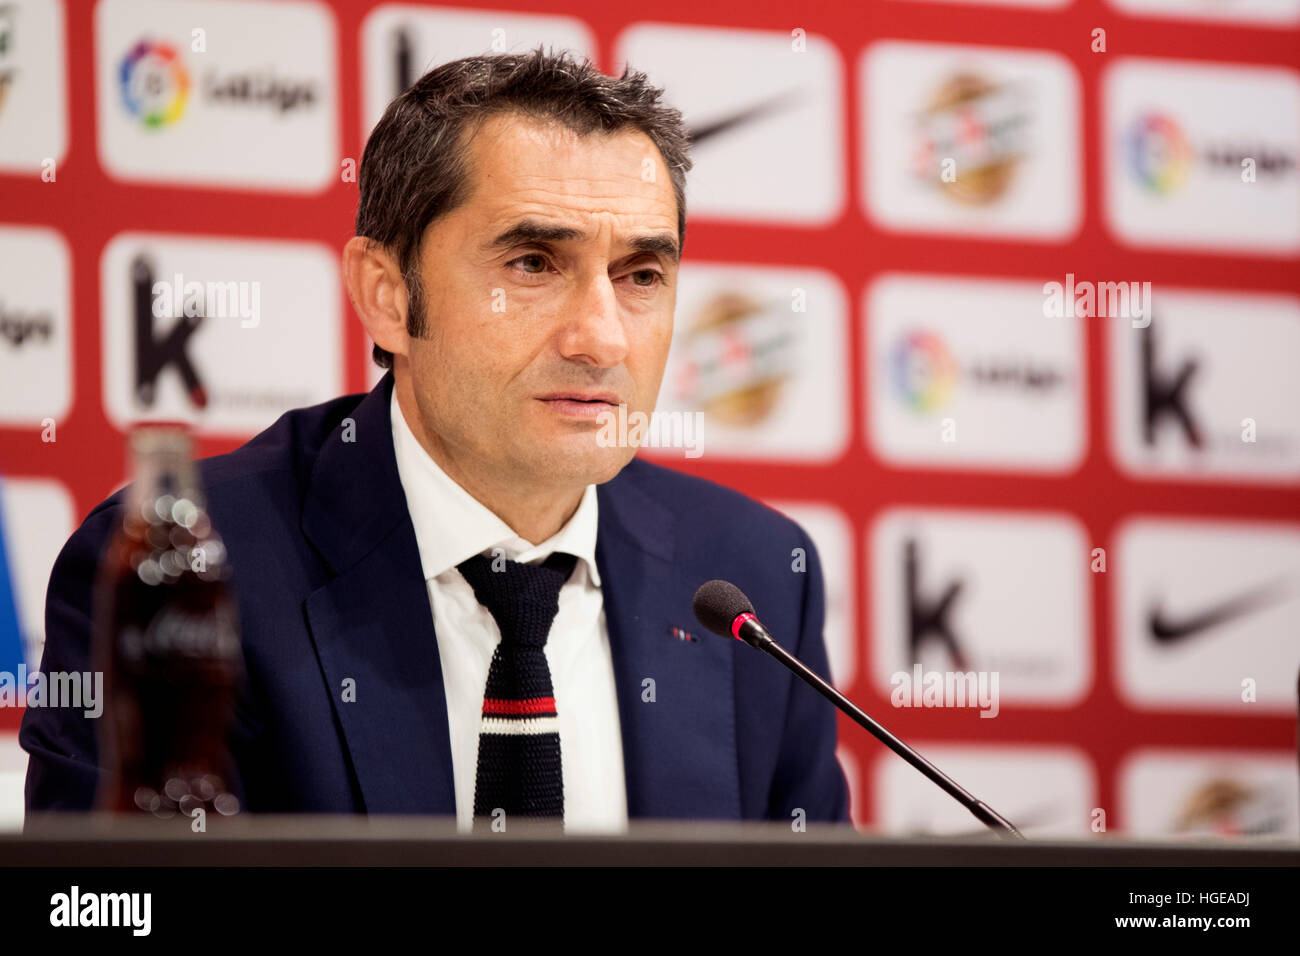 Bilbao, Spain. 8th January, 2017. Ernesto Valverde (Coach, Athletic) during the press conference of football match of seventeenth round of Season 2016/2017 of Spanish league ‘La Liga’ between Athletic Club and Deportivo Alaves at San Mames Stadium on January 8, 2017 in Bilbao, Spain. ©David Gato/Alamy Live News Stock Photo